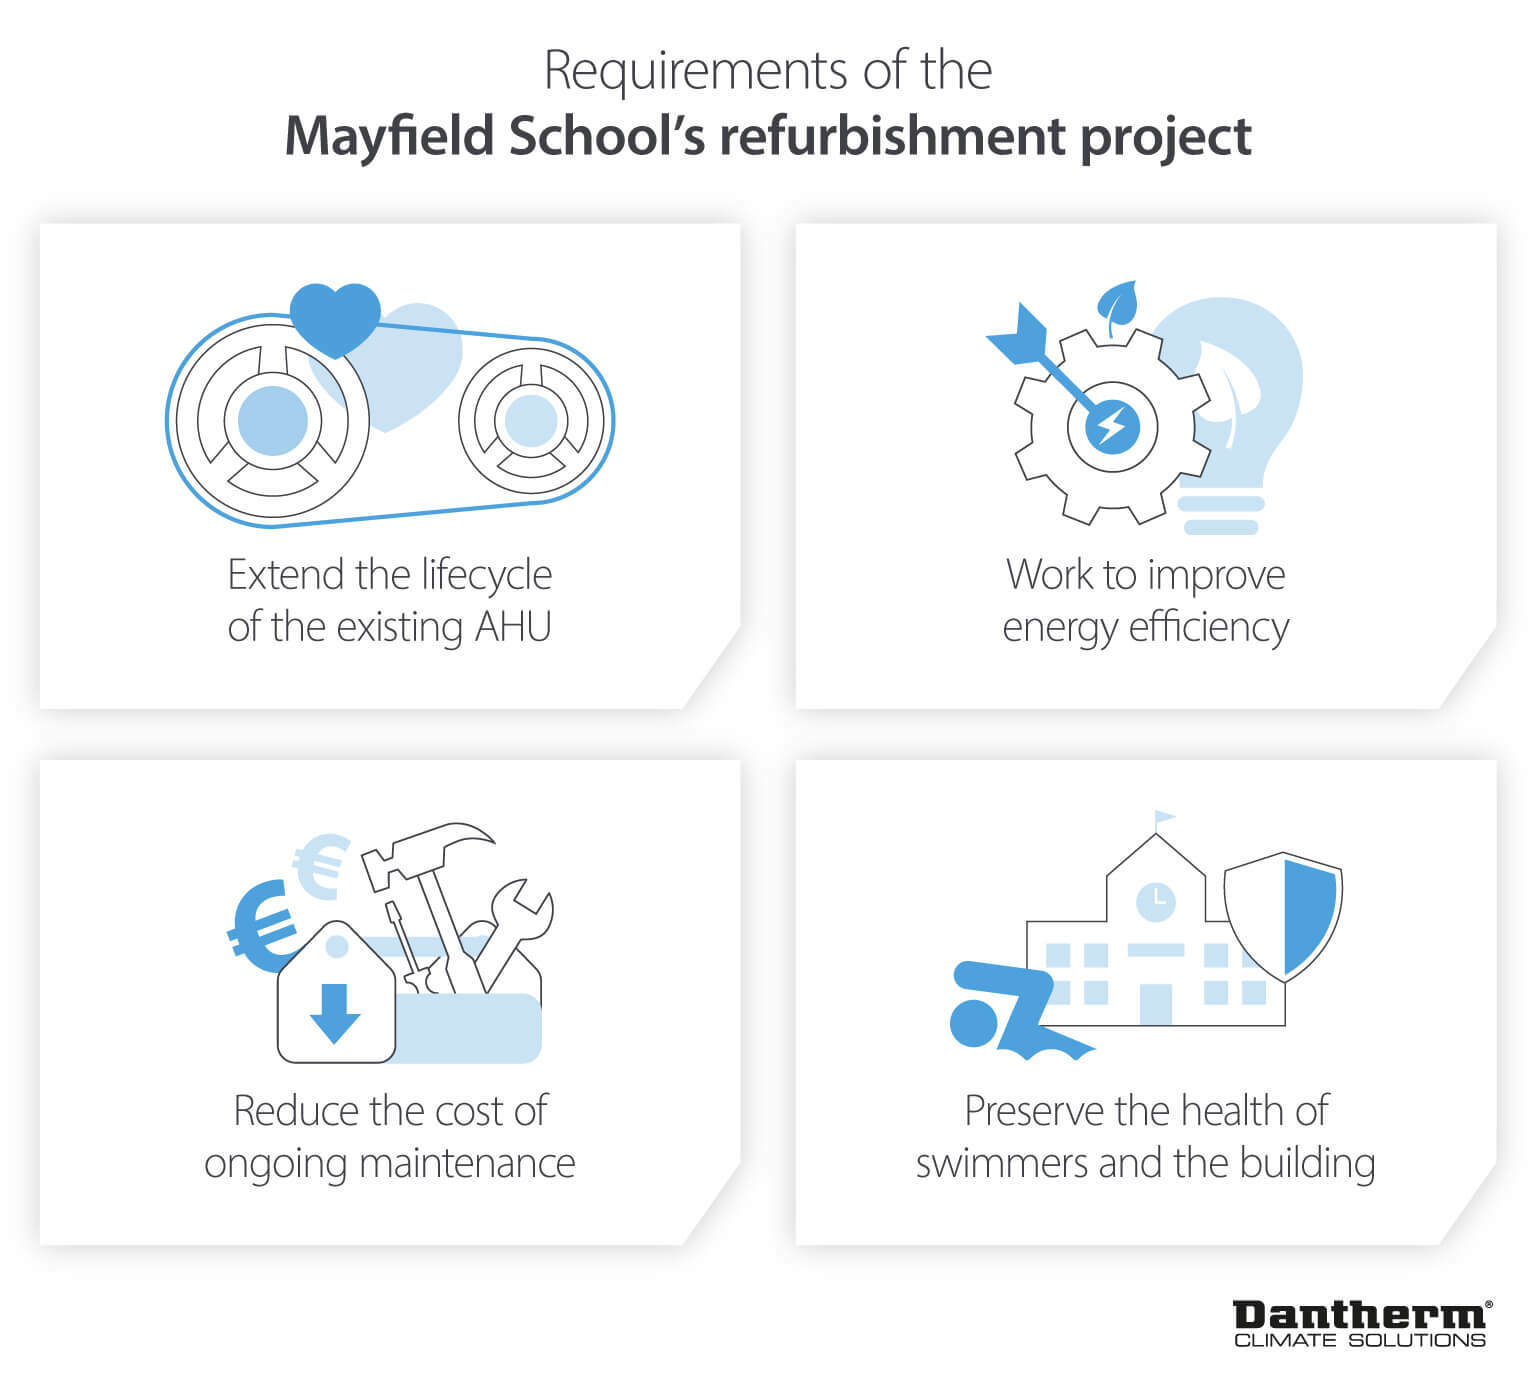 Requirements and goals for refurbishing air handling unit for Mayfield Girls School - Dantherm infographic image